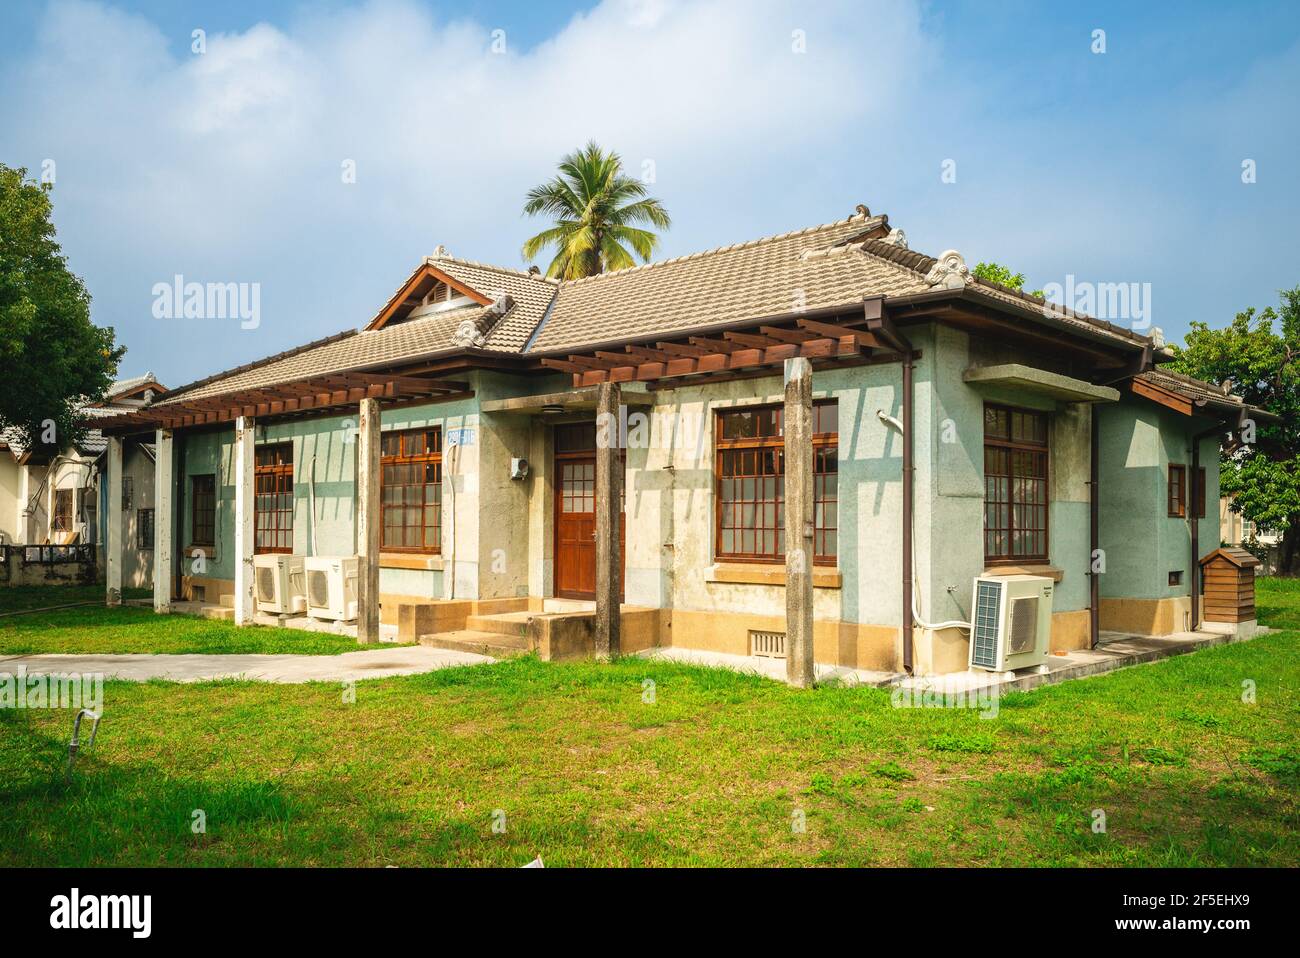 December 23, 2020: Victory Star V.I.P. Zone, former military dormitory for air force located in pingtung city, taiwan. There are 69 residential buildi Stock Photo